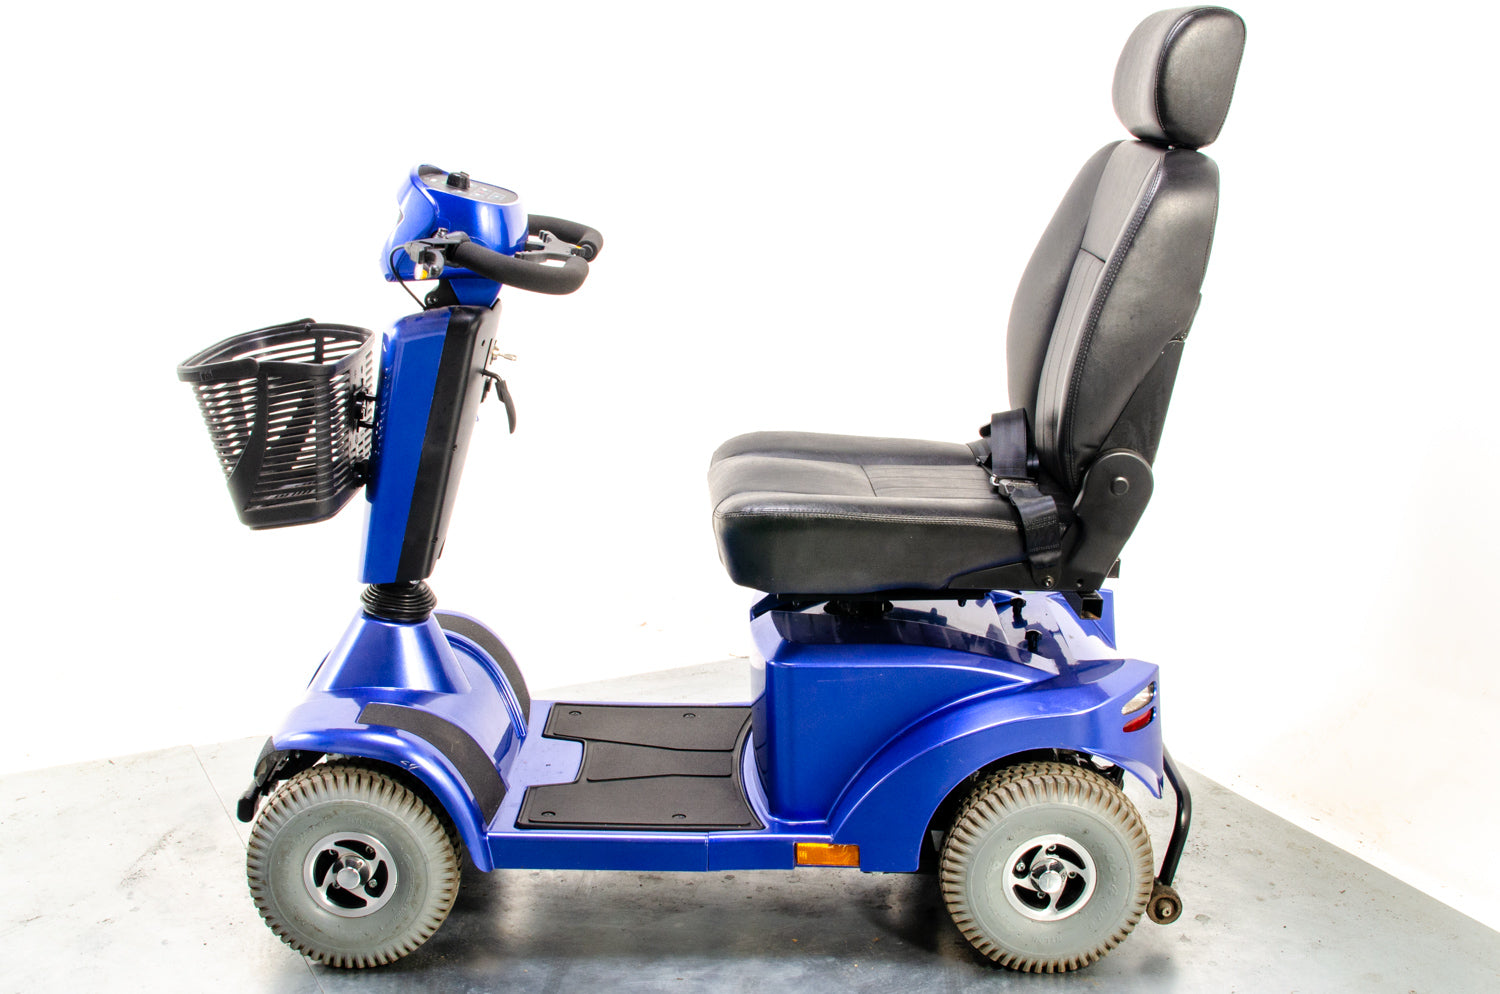 Midi GTE Sterling S425 Used Mobility Scooter 8mph Blue Midsize Pneumatic Pavement 13290